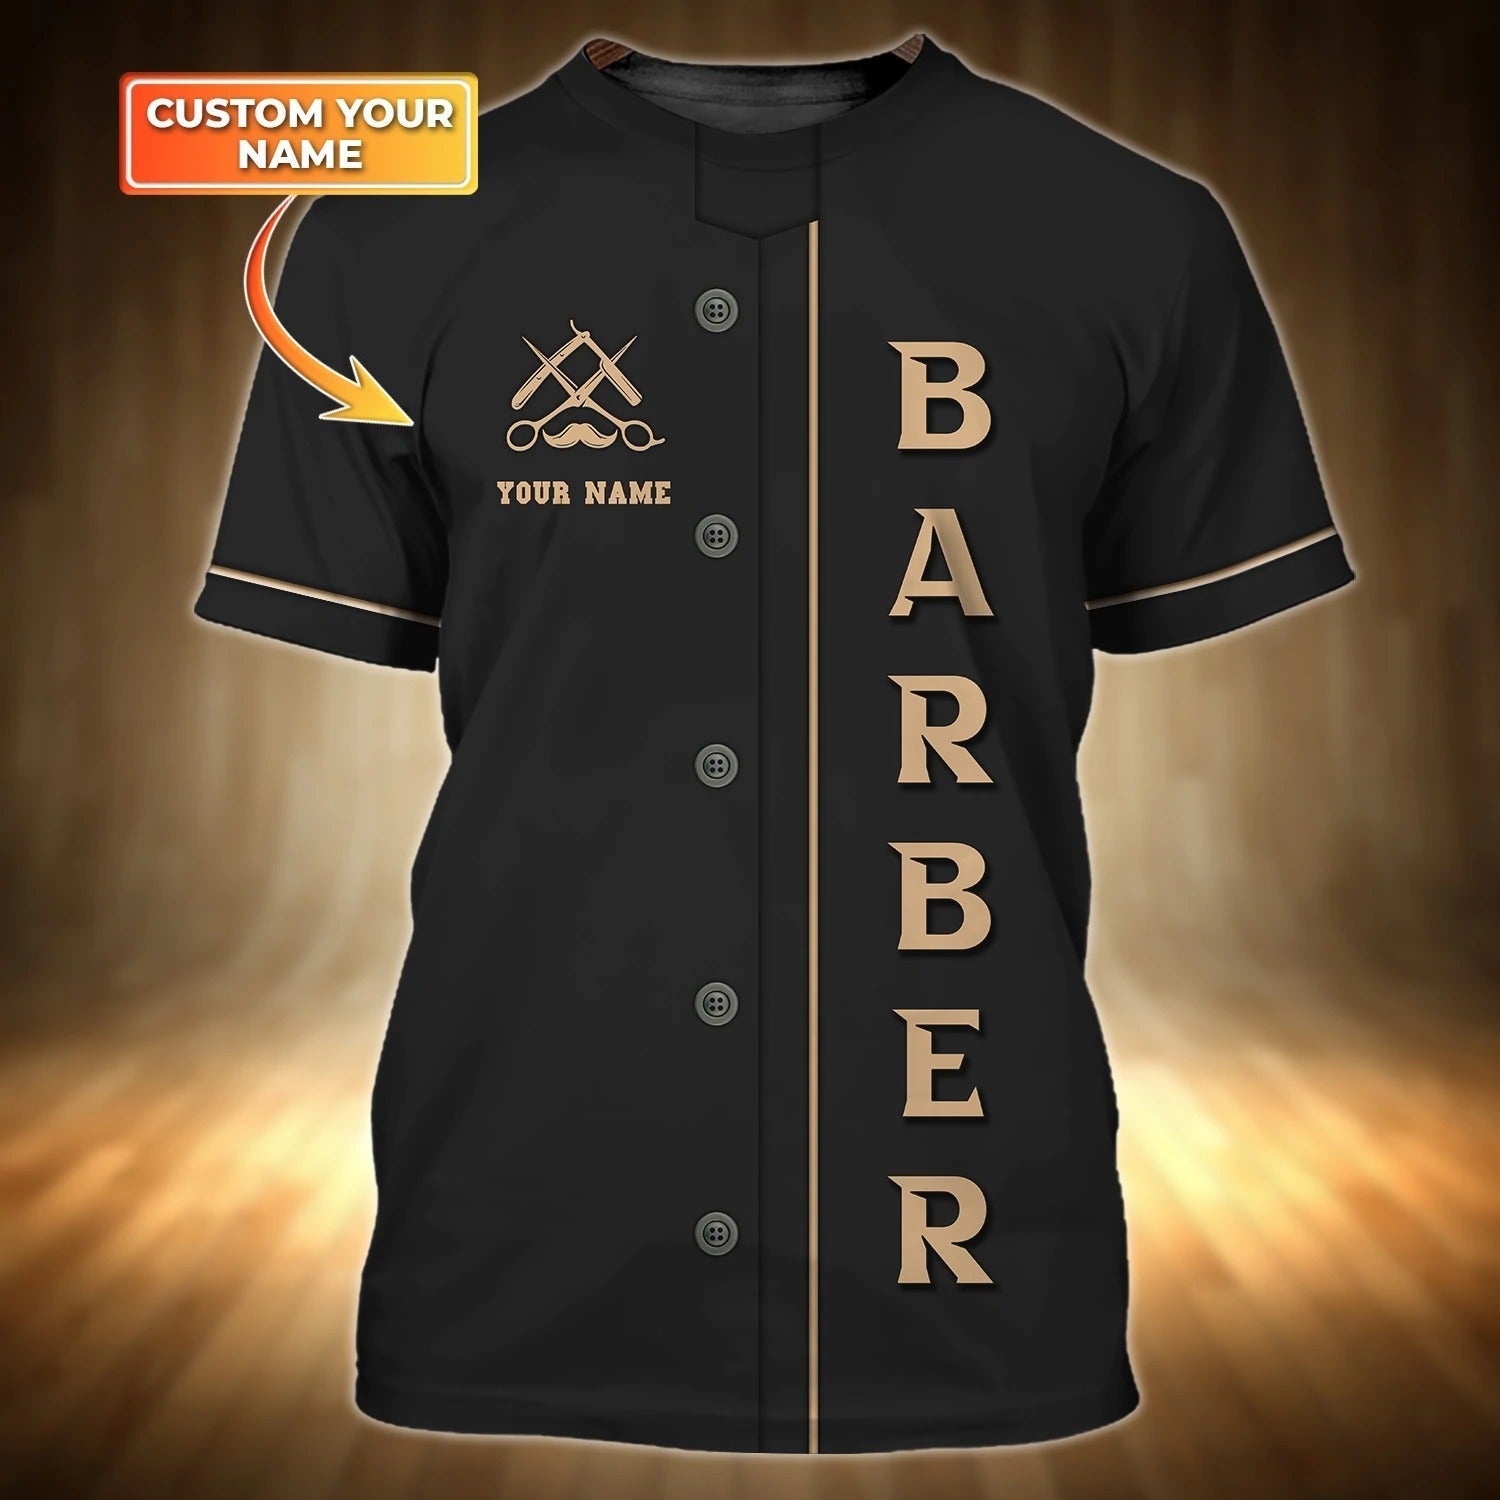 Personalized 3D All Over Print Barber Shirt/ Present To A Professional Barber/ Gift To A Barber Friend